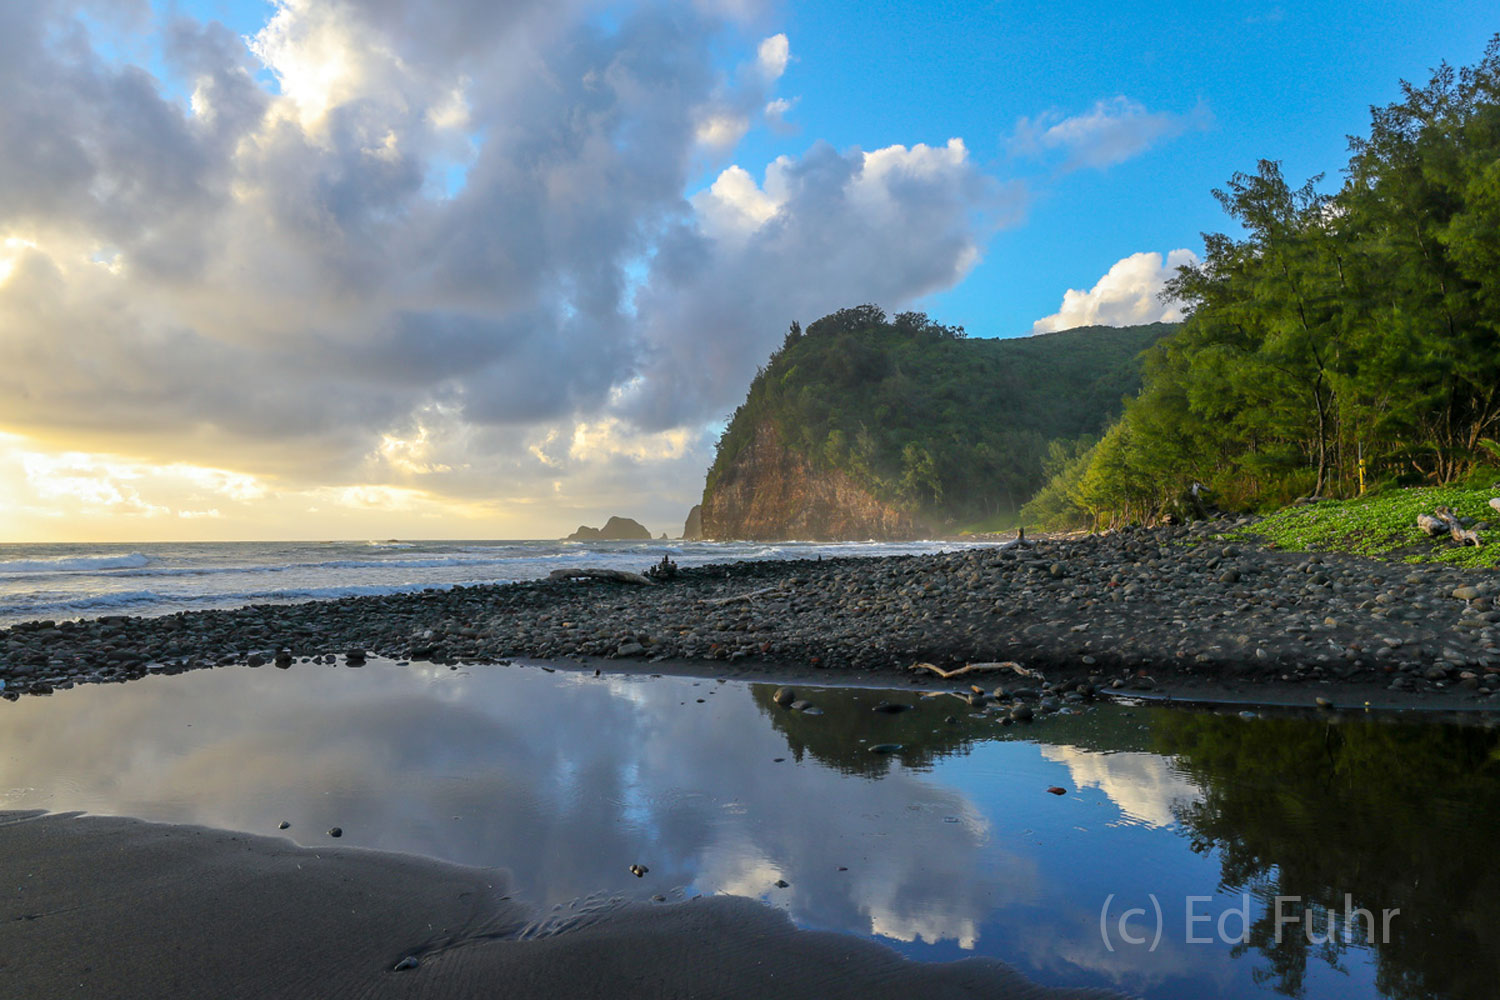 A small tidal pool reflects the early light in the Pololu Valley.